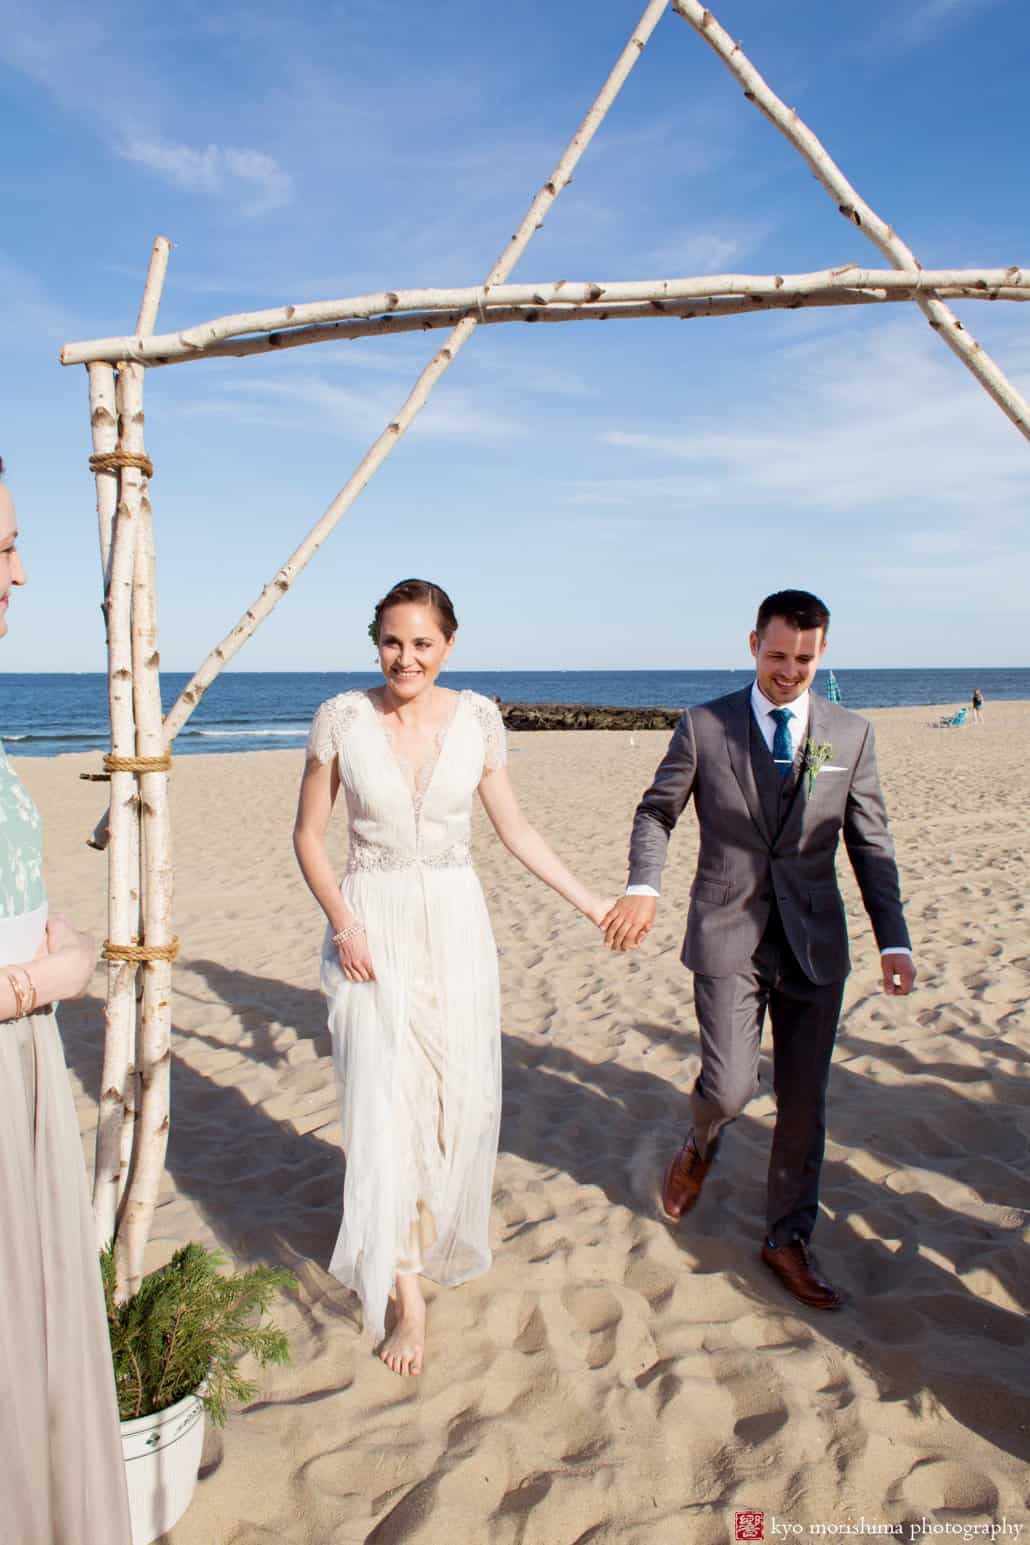 Bride and groom step under handmade arch during Asbury Park beach wedding ceremony, photographed by Kyo Morishima